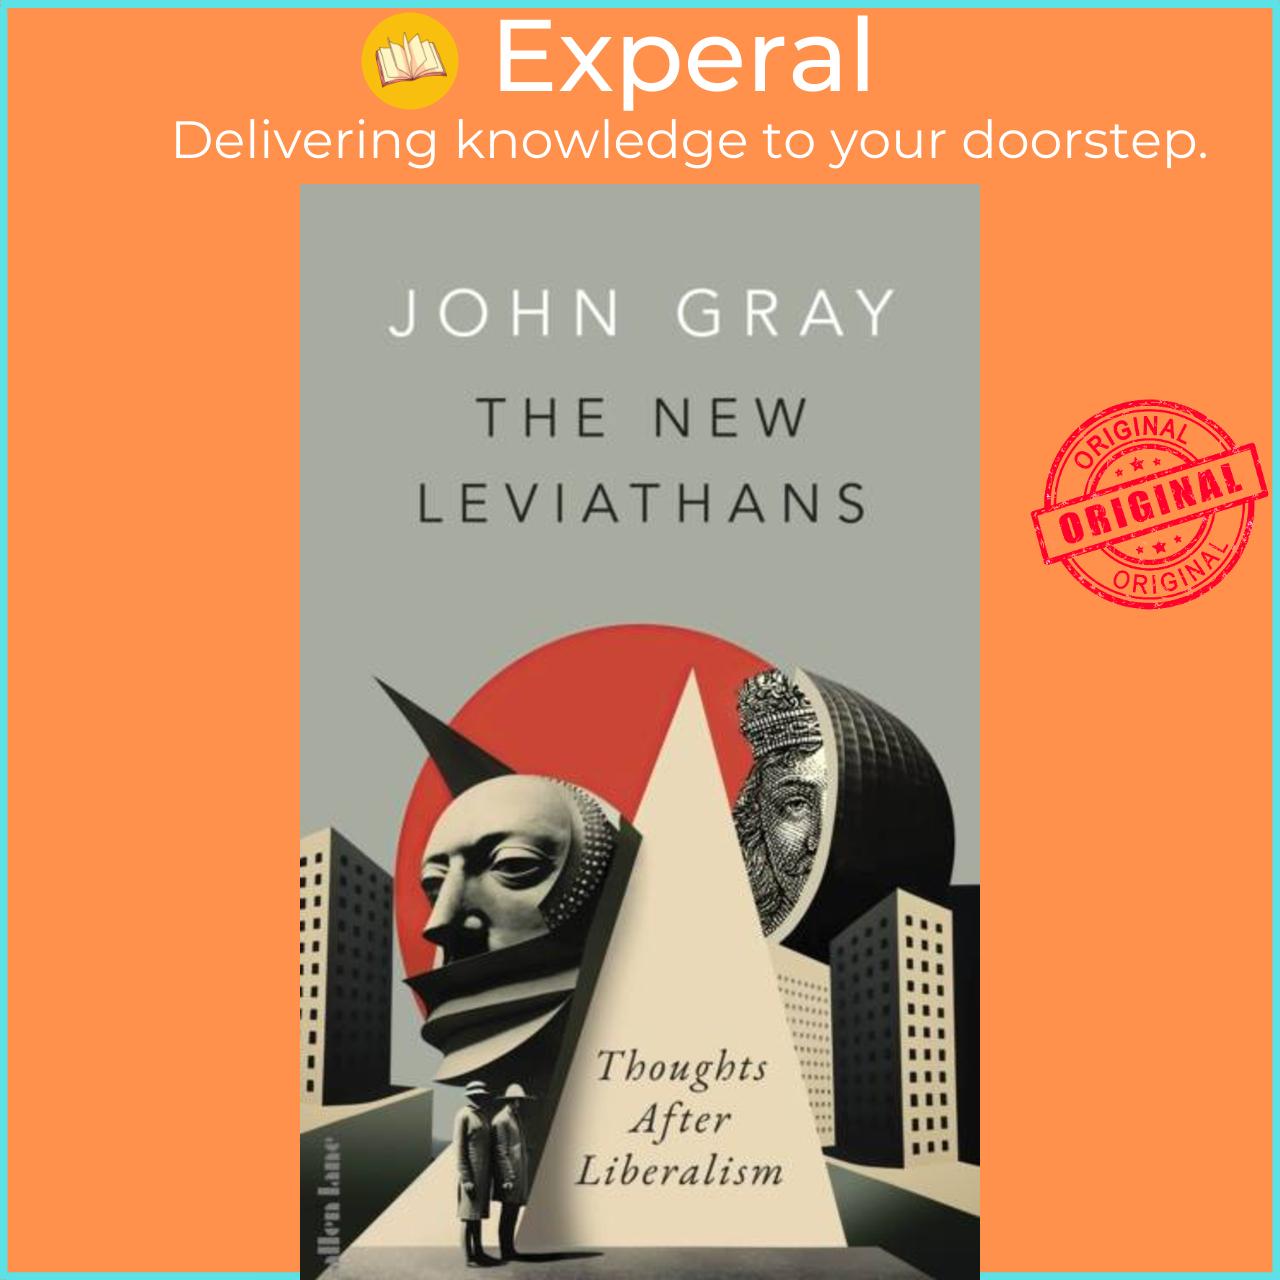 Sách - The New Leviathans - Thoughts After Liberalism by John Gray (UK edition, hardcover)